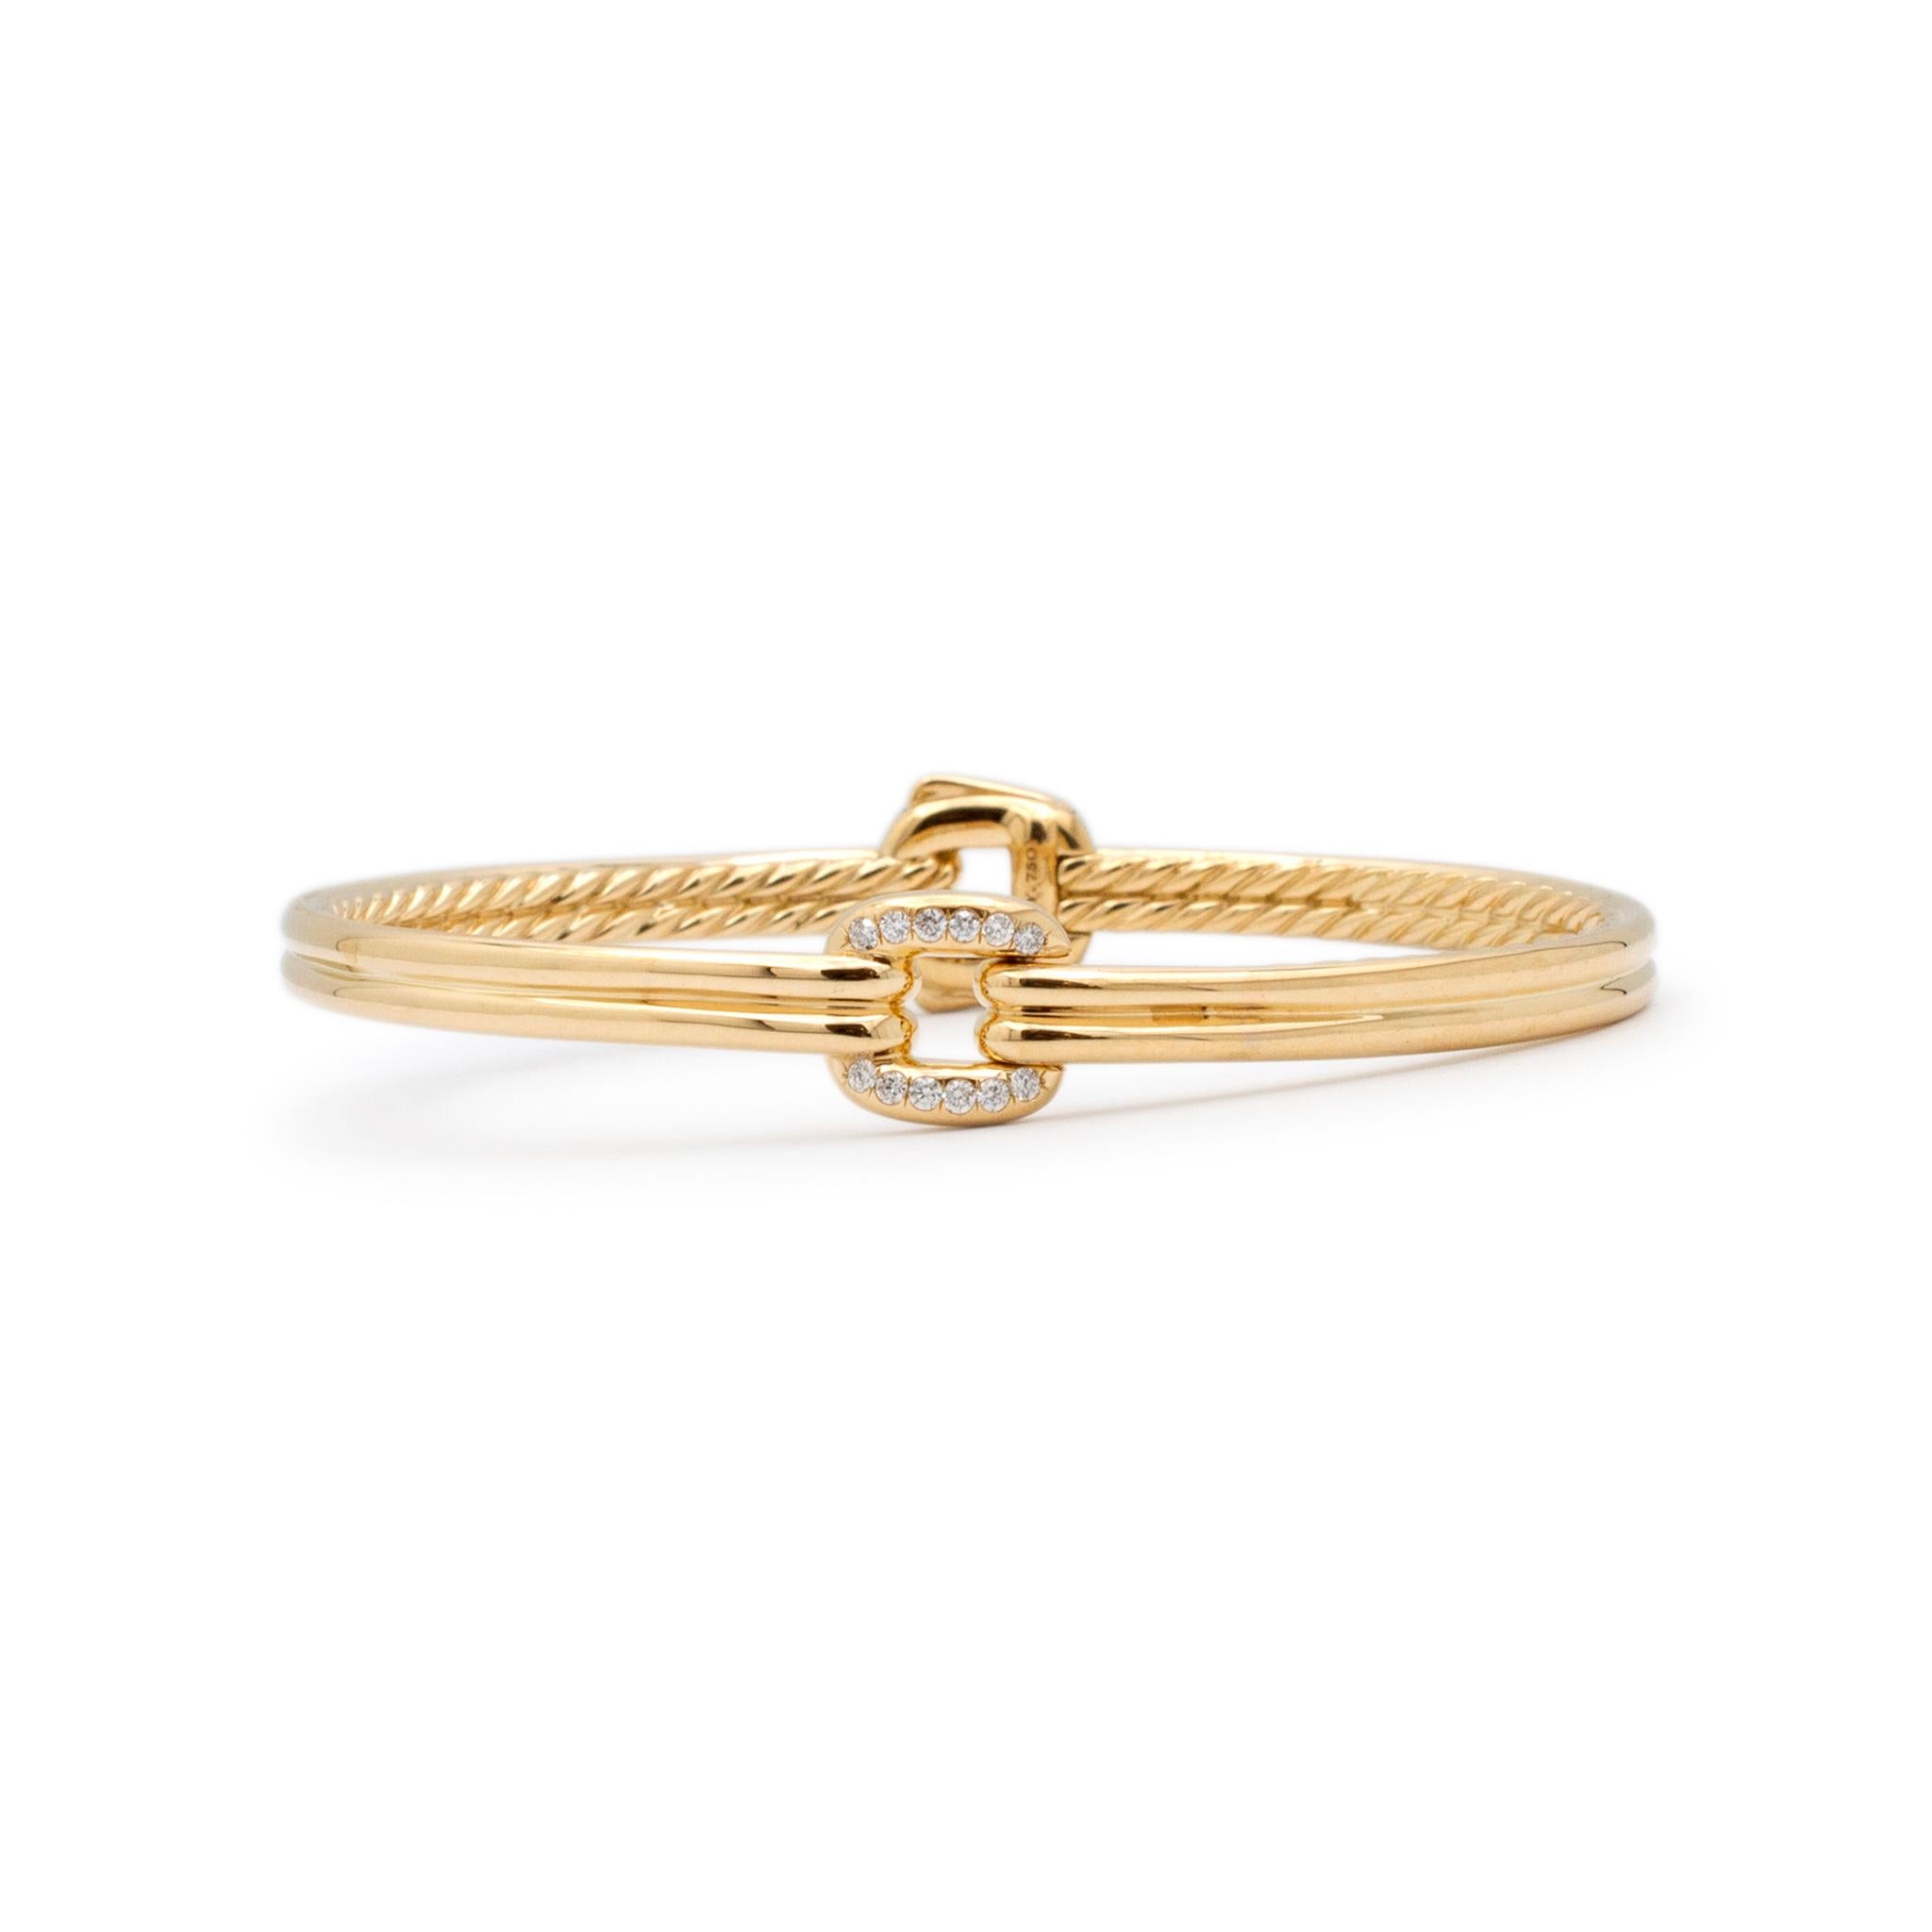 Brand: David Yurman

Gender: Ladies

Metal Type: 18K Yellow Gold

Length: 6.00 mm

Width : 12.25 inches

Weight: 25.07 grams

18K yellow gold diamond bangle bracelet. The metal was tested and determined to be 18K yellow gold. Engraved with 